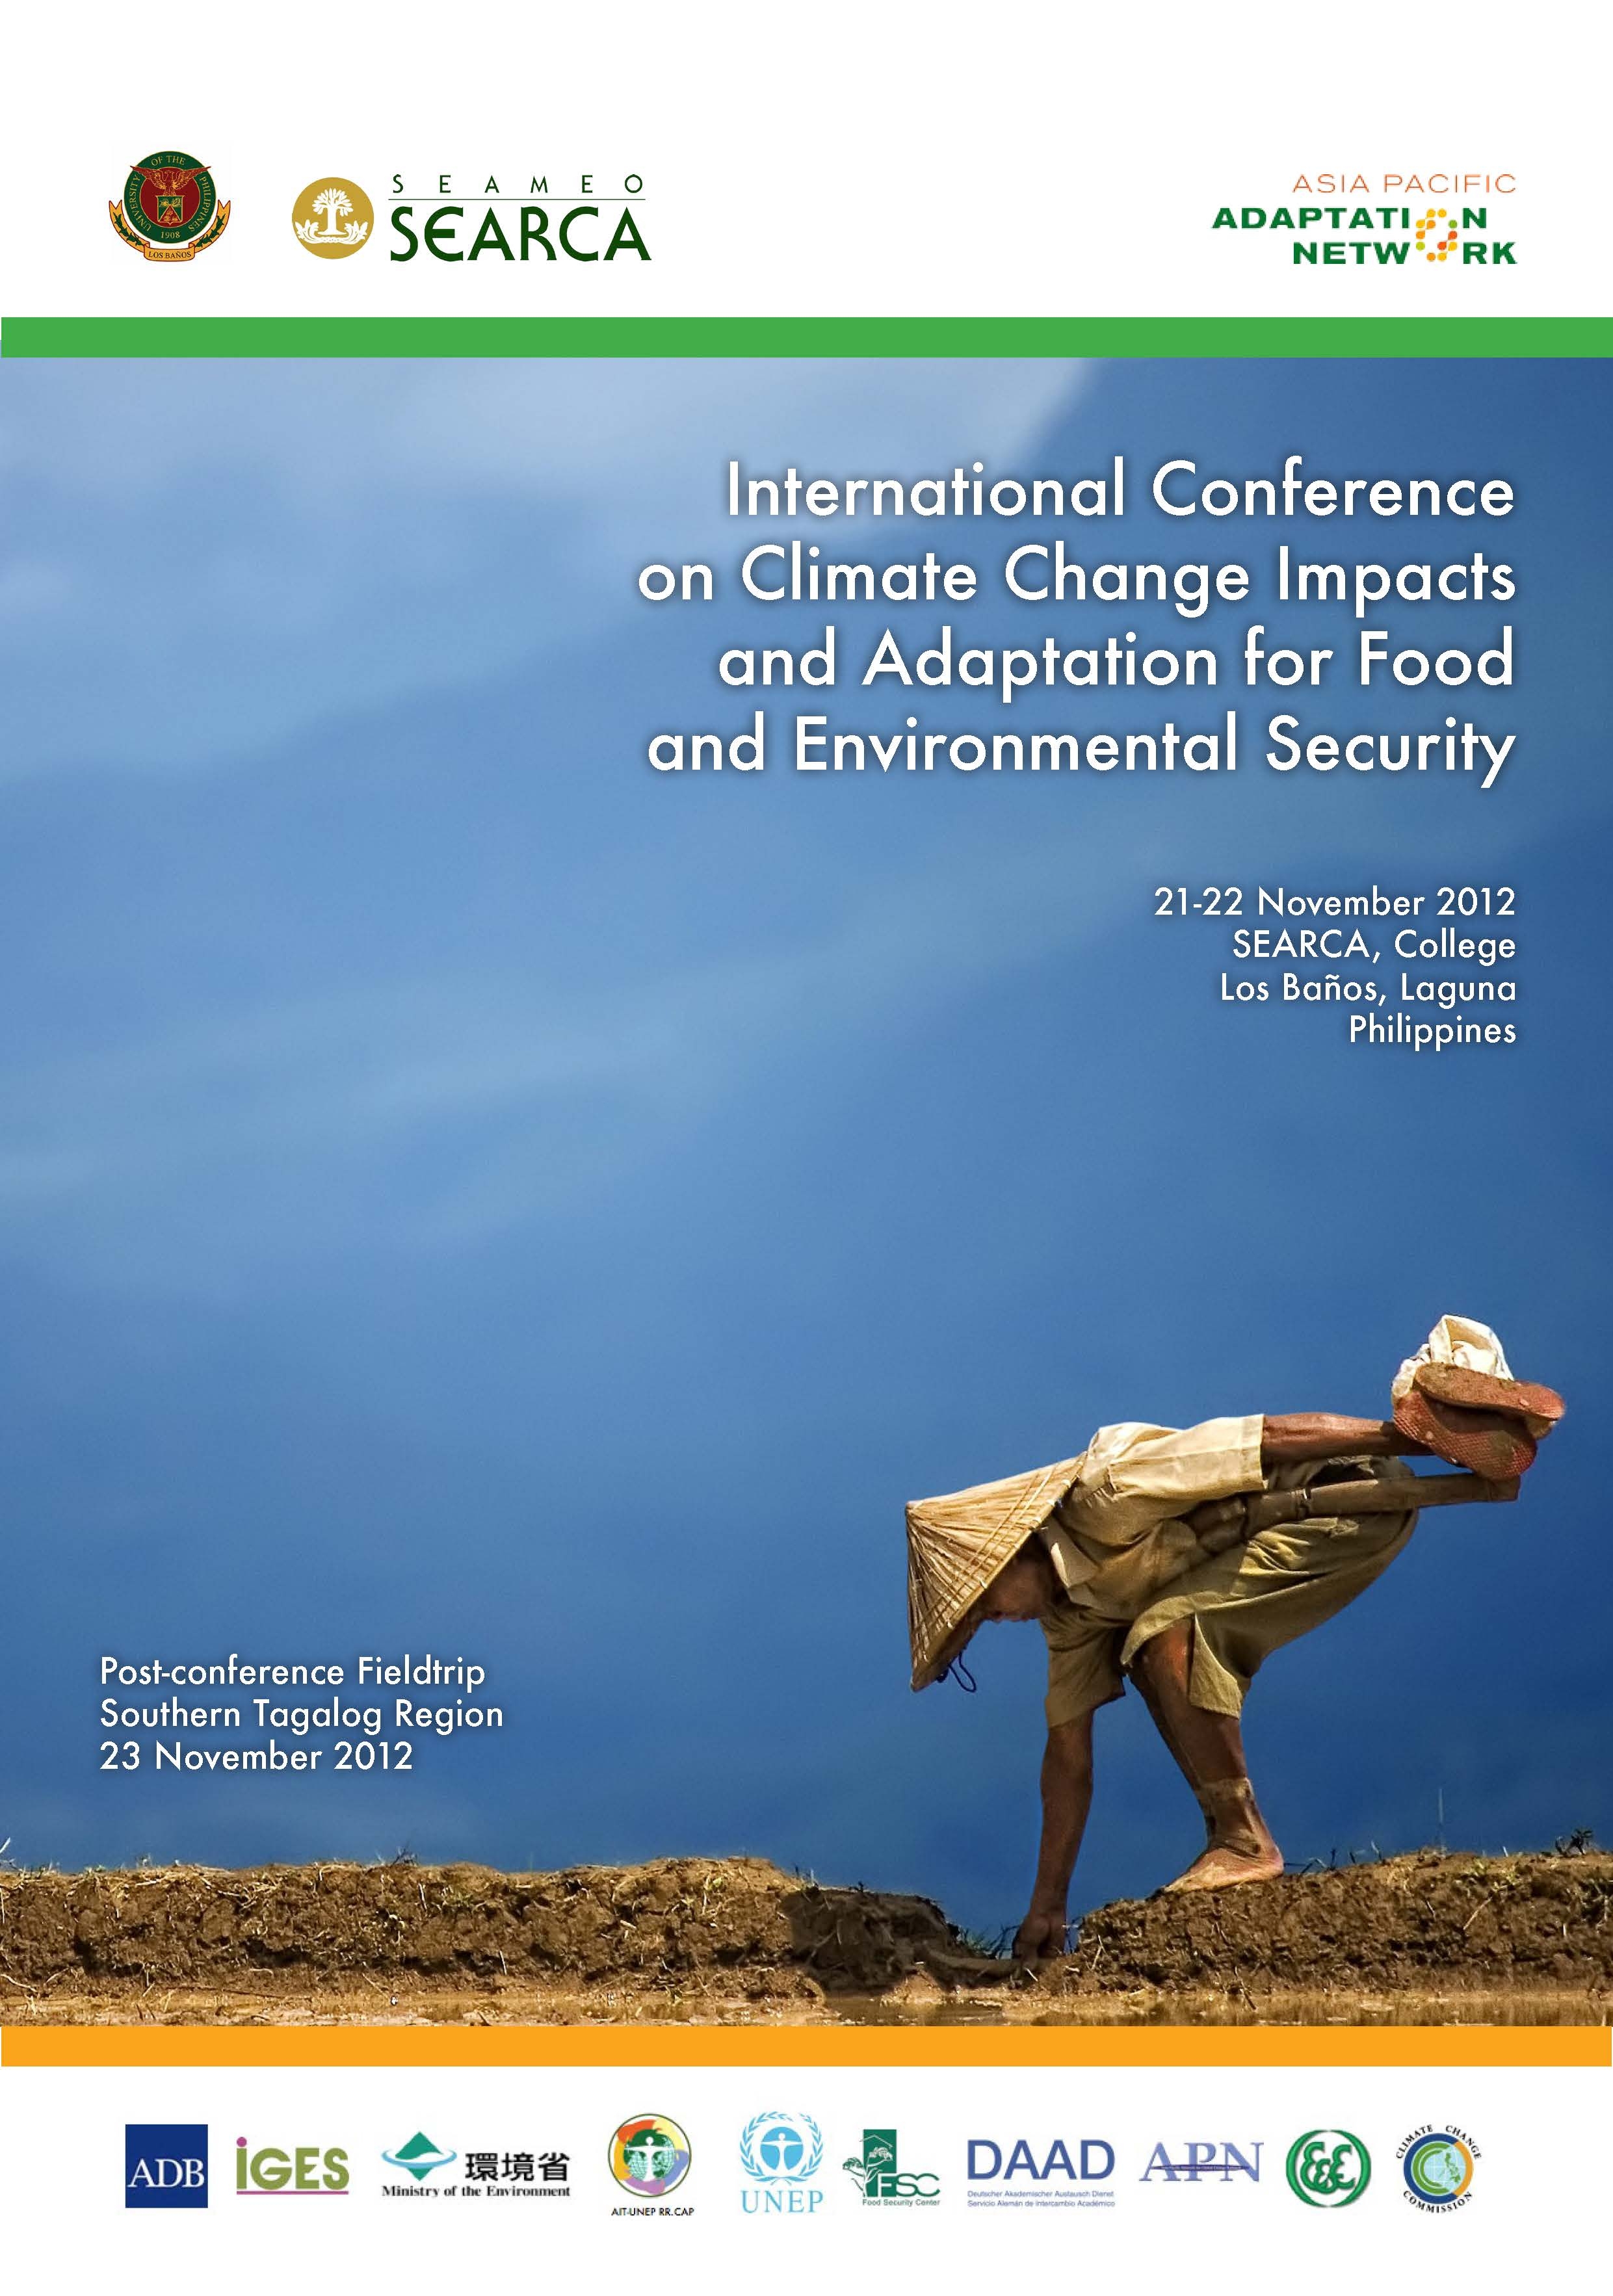 International Conference on CLIMATE CHANGE IMPACTS AND ADAPTATION FOR FOOD AND ENVIRONMENTAL SECURITY (Souvenir Program and Abstracts of Conference Papers)